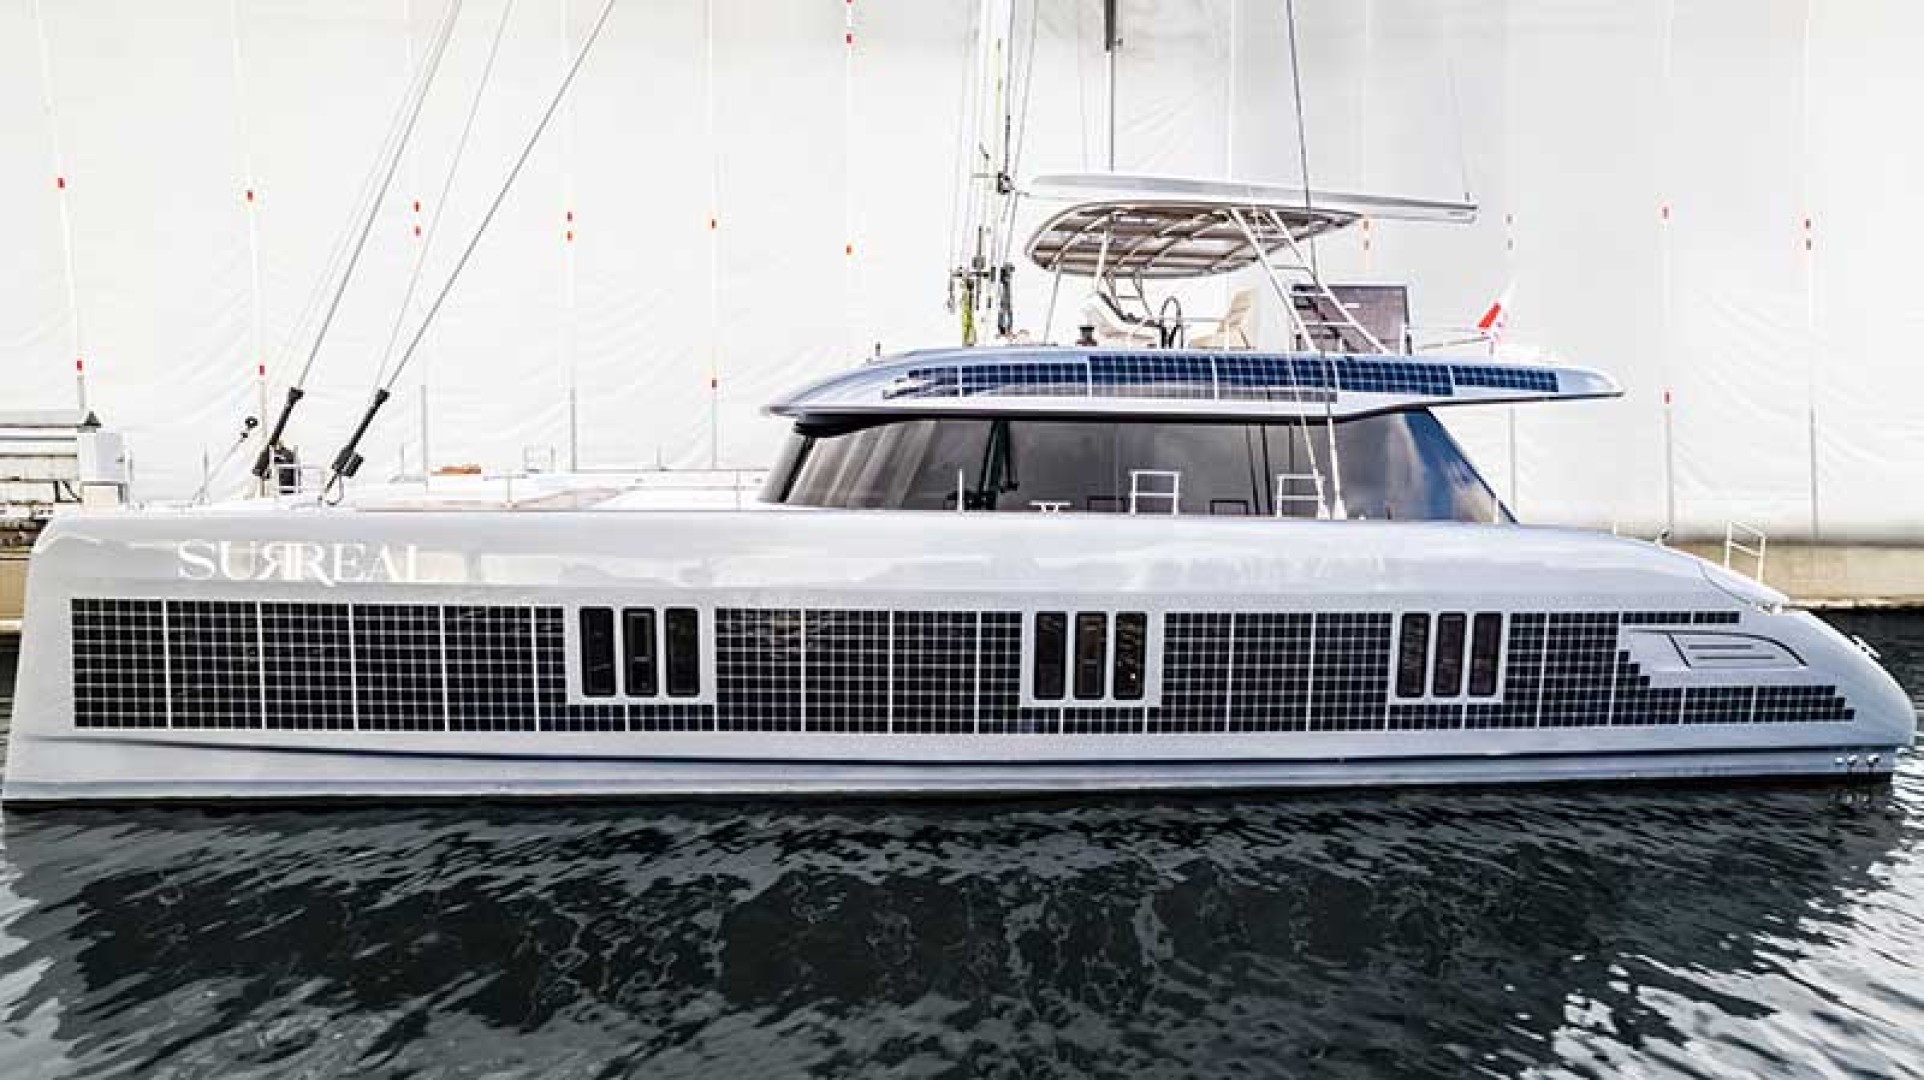 Solar Power Excellence: Sunreef launches a new Sunreef 60 Eco